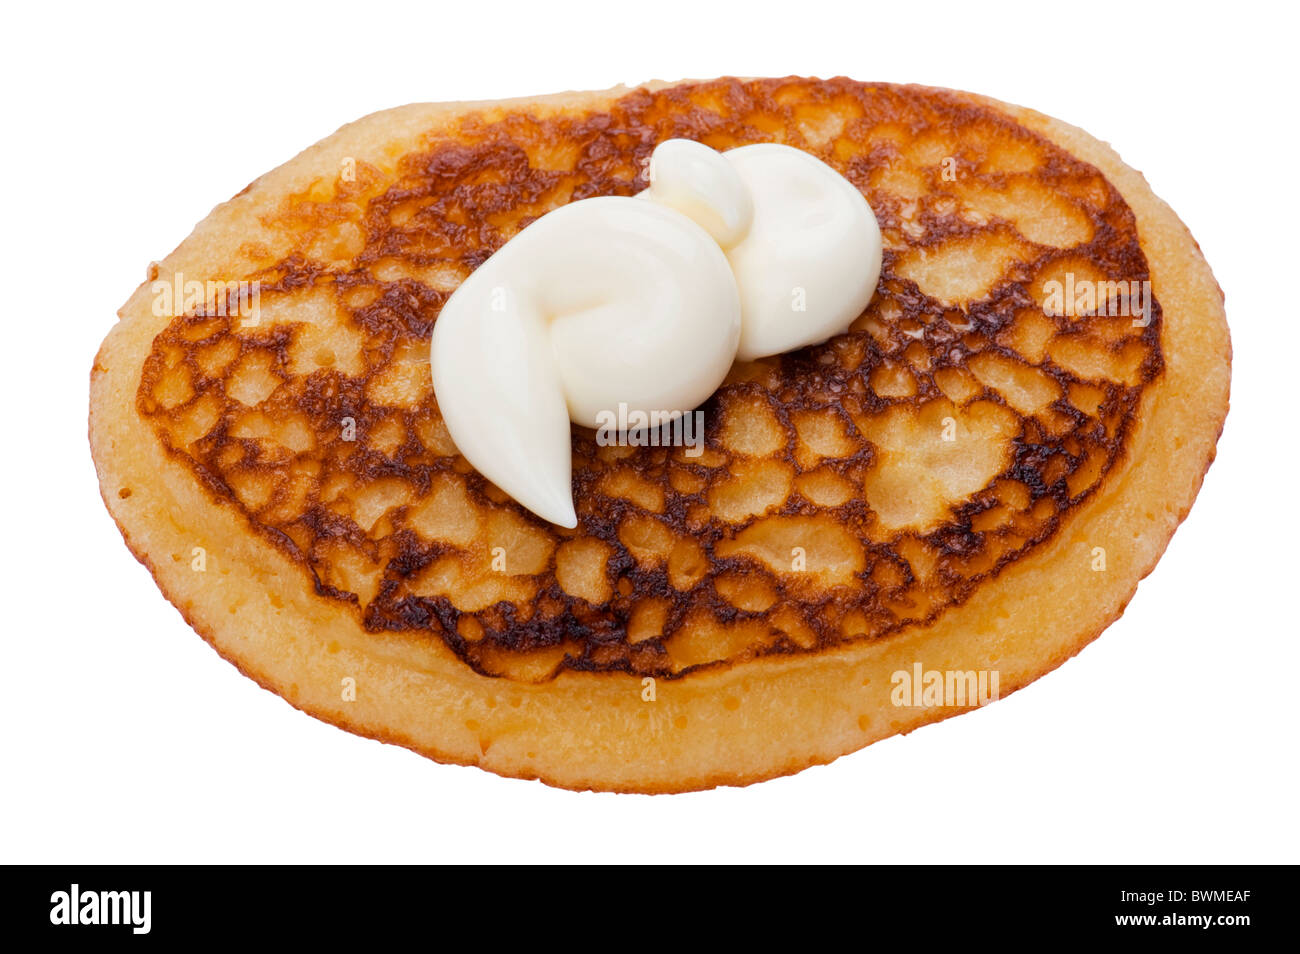 object on white - Food pancake with sour cream close up Stock Photo